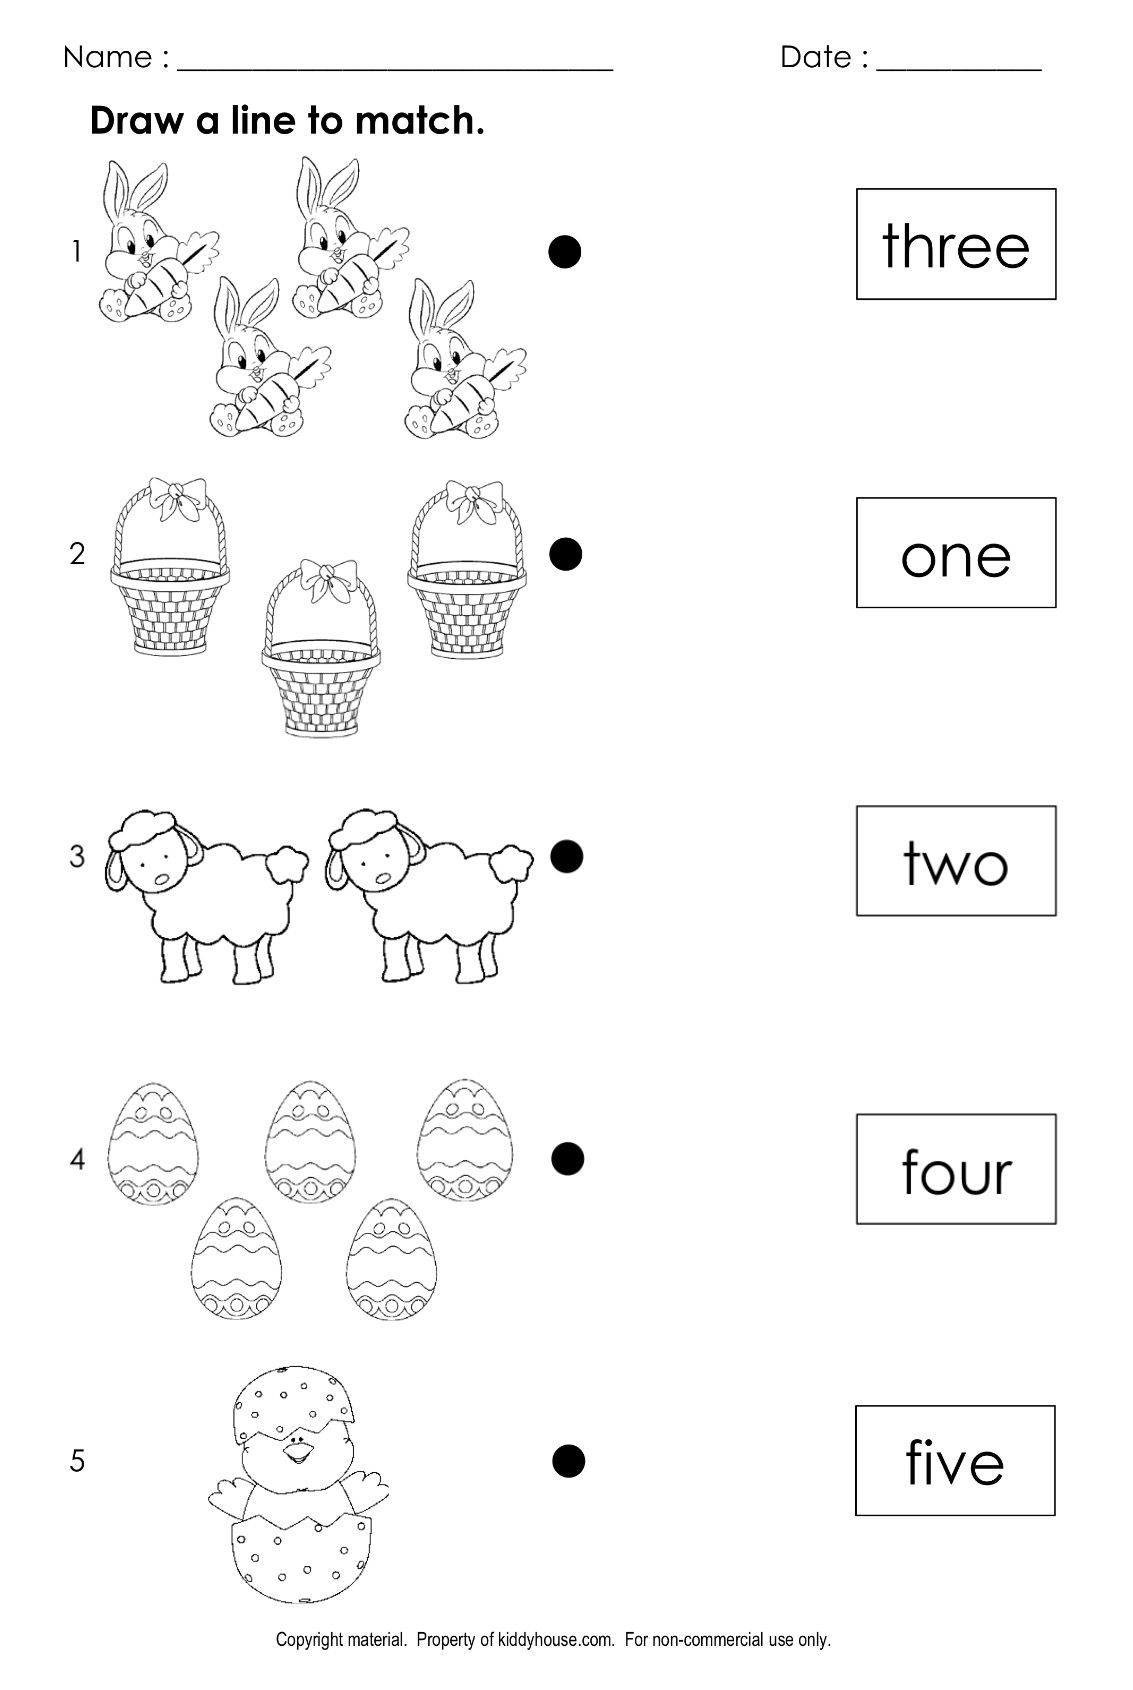 pin-by-erin-holl-on-primary-maths-number-words-worksheets-kids-math-worksheets-numbers